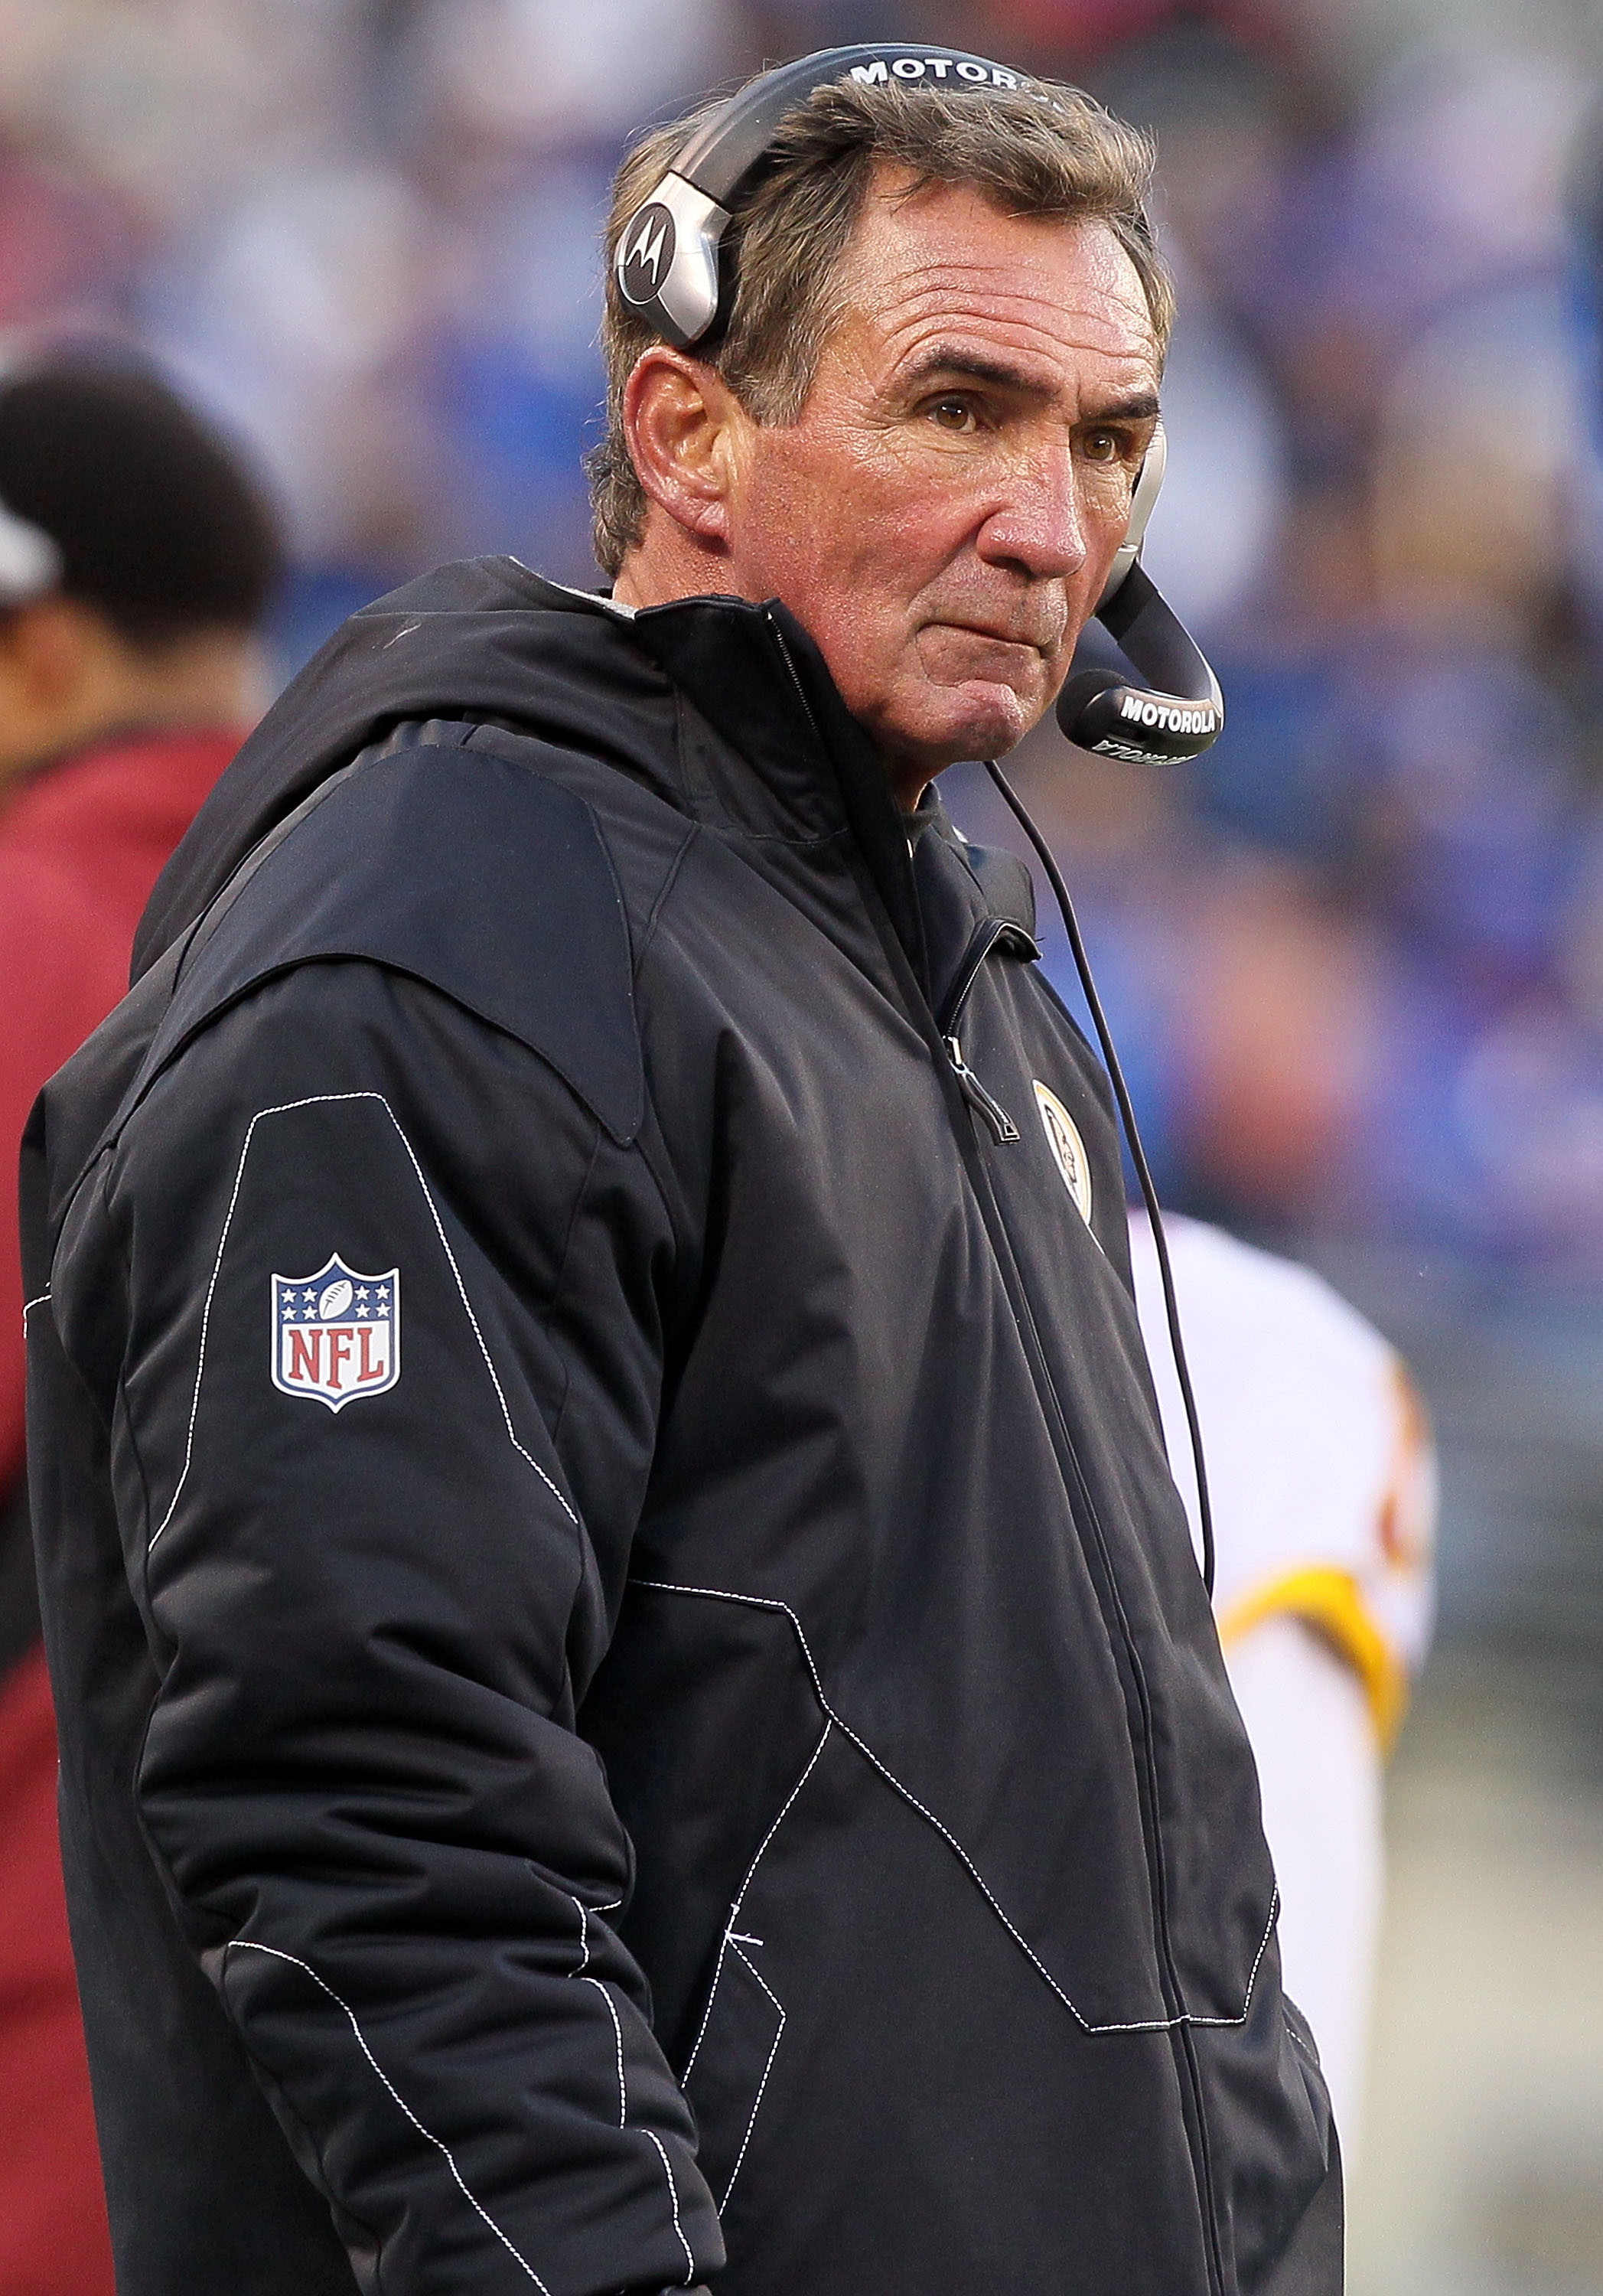 EAST RUTHERFORD, NJ - DECEMBER 05: Head coach Mike Shanahan of the Washington Redskins looks on against the New York Giants on December 5, 2010 at the New Meadowlands Stadium in East Rutherford, New Jersey. The Giants defeated the Redskins 31-7.  (Photo b